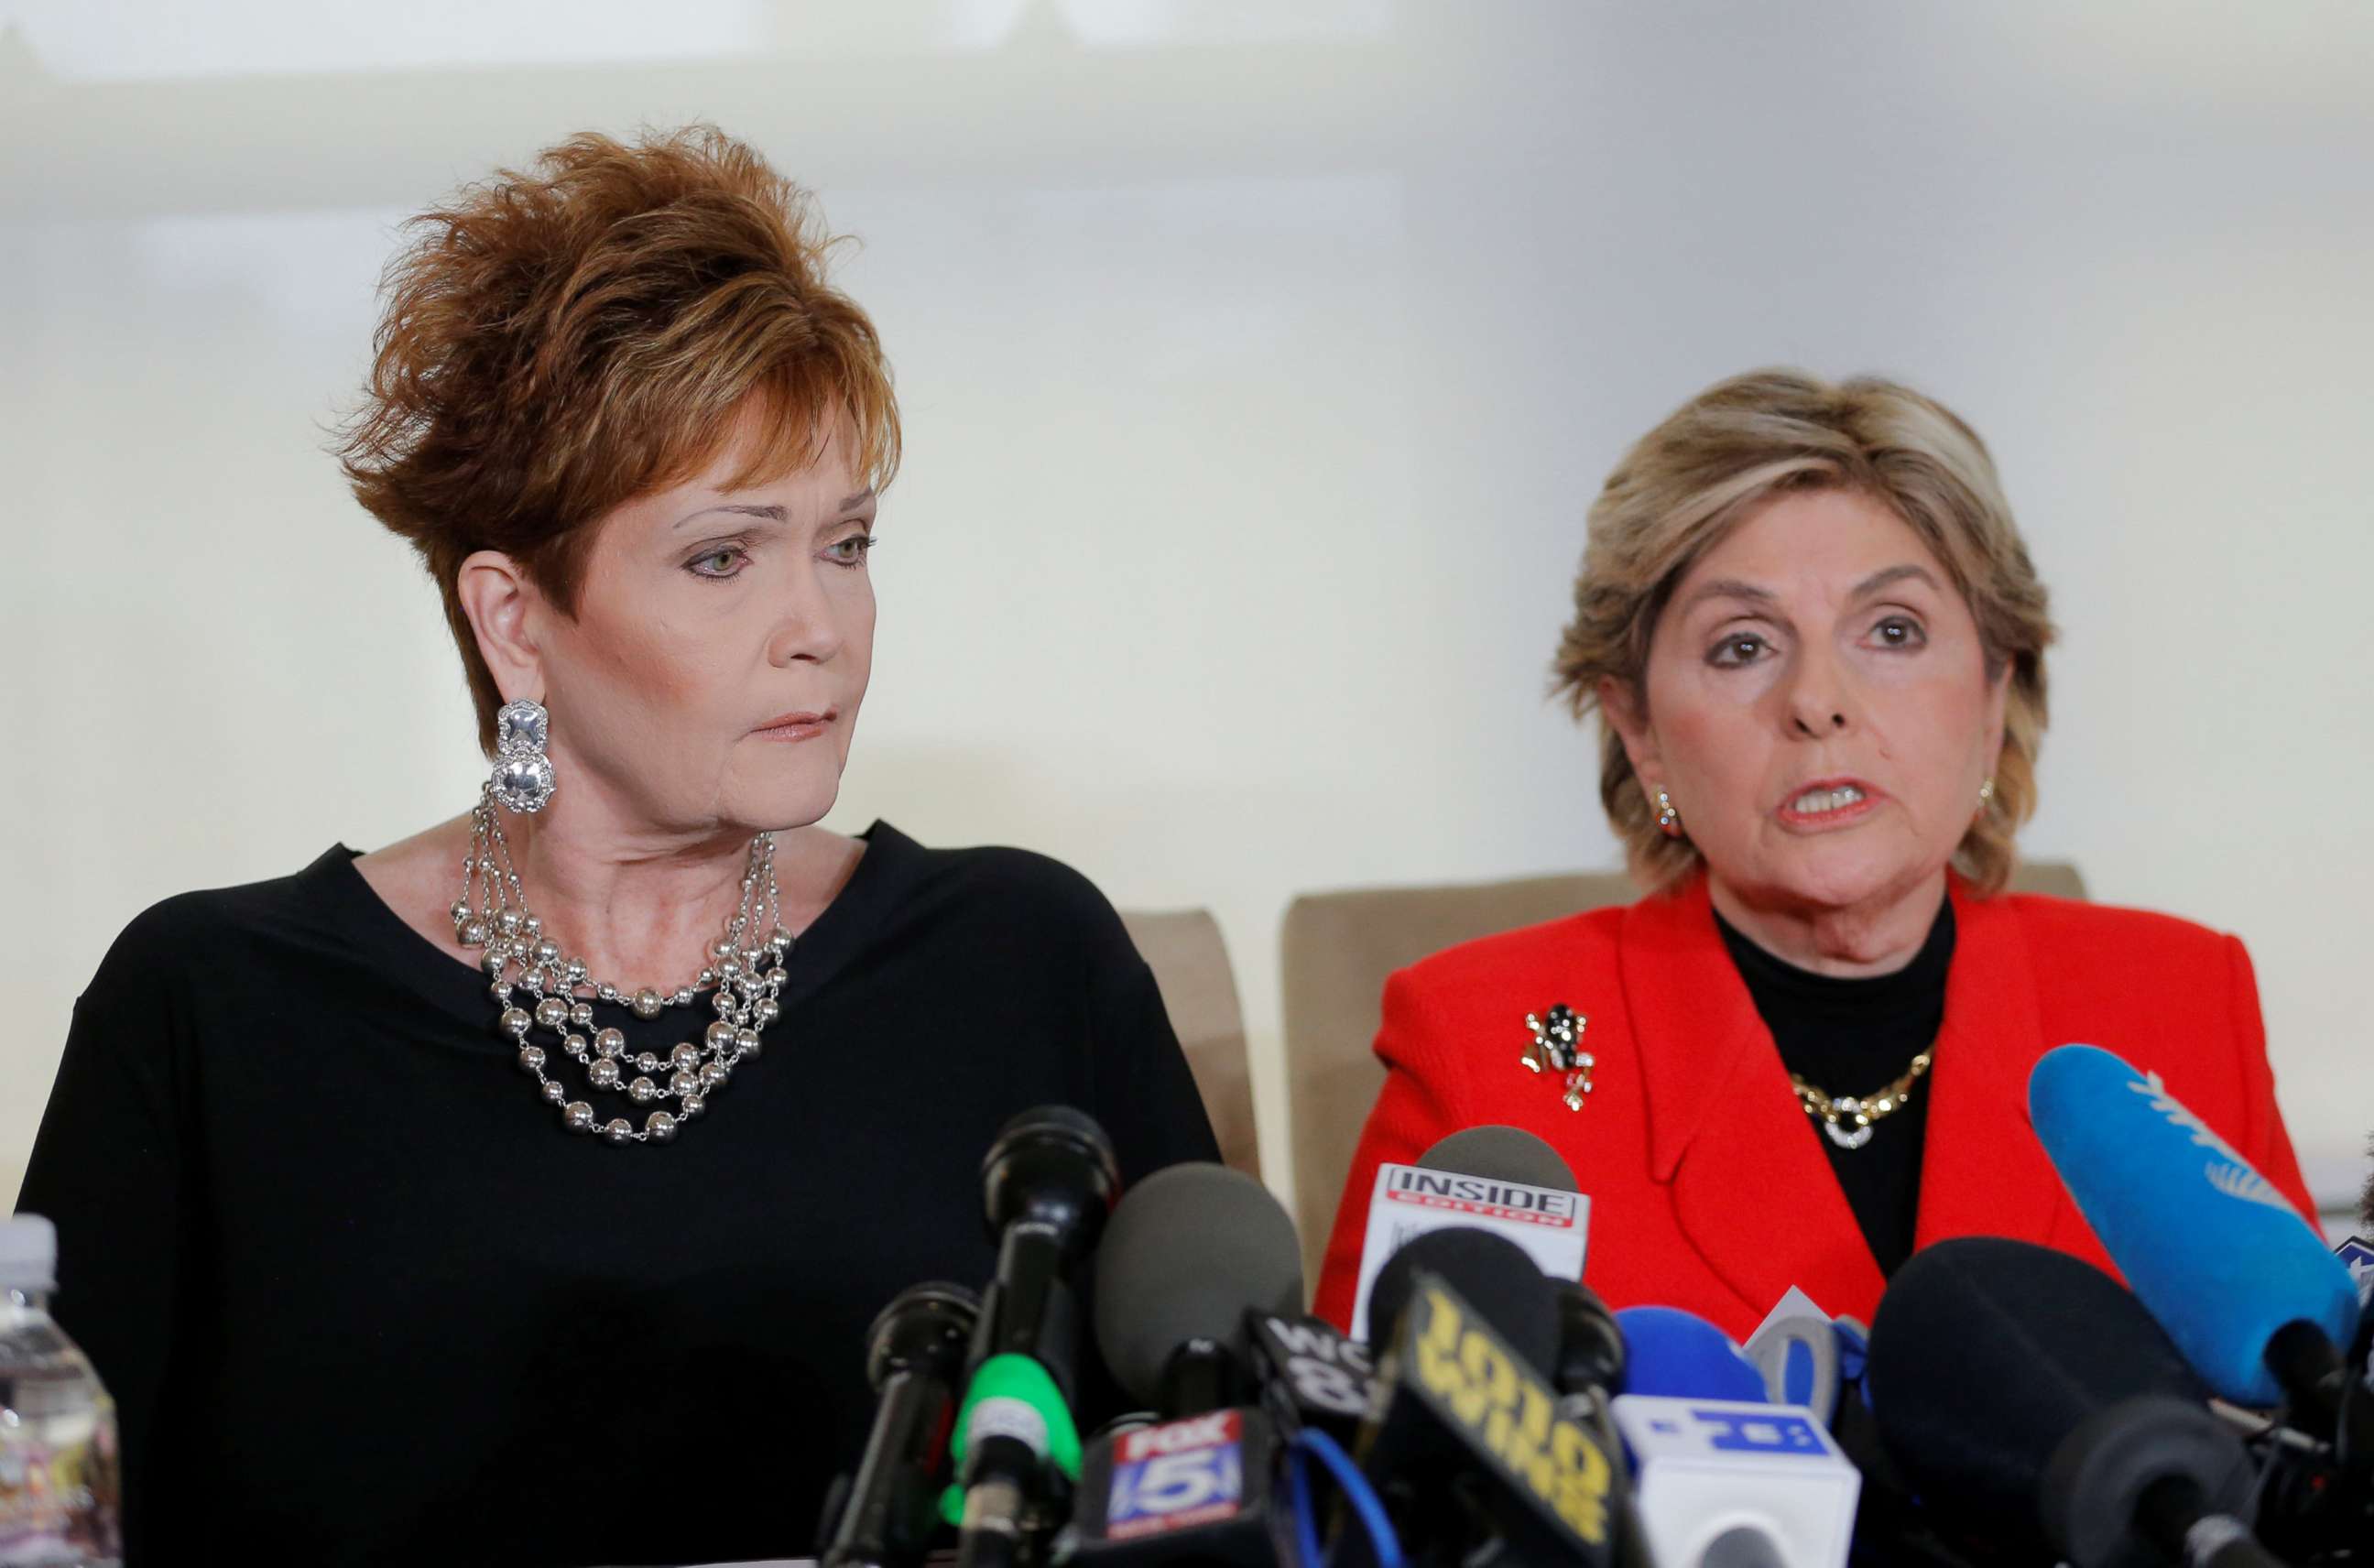 PHOTO: Beverly Nelson (L) speaks to reporters with attorney Gloria Allred during a news conference announcing new allegations of sexual misconduct against Alabama Republican congressional candidate Roy Moore, in New York, Nov. 13, 2017. 